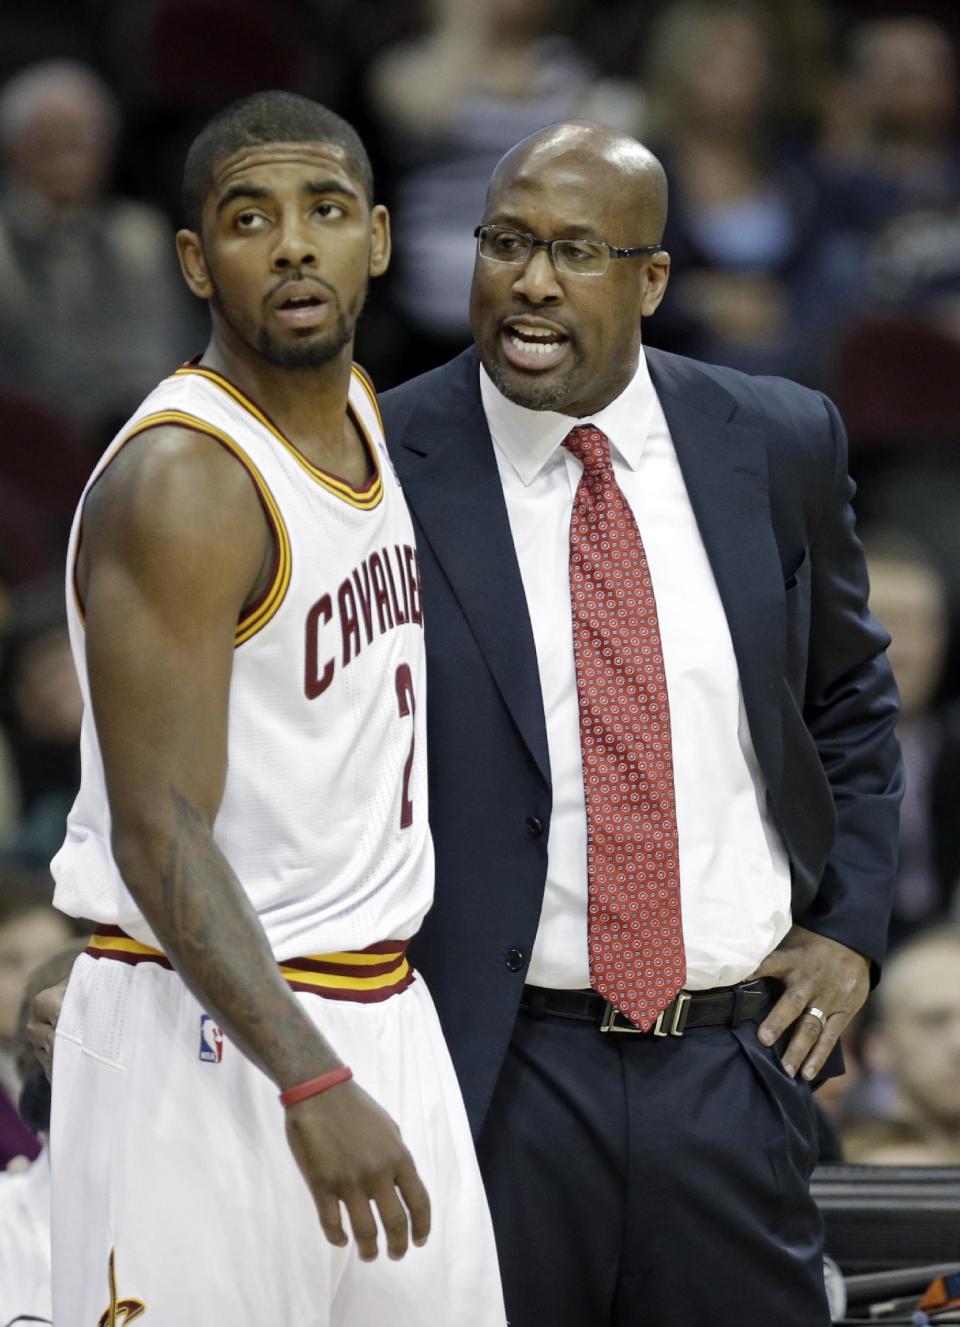 Cleveland Cavaliers head coach Mike Brown, right, talks to Kyrie Irving in the first quarter of an NBA basketball game against the Los Angeles Lakers, Wednesday, Feb. 5, 2014, in Cleveland. (AP Photo/Mark Duncan)